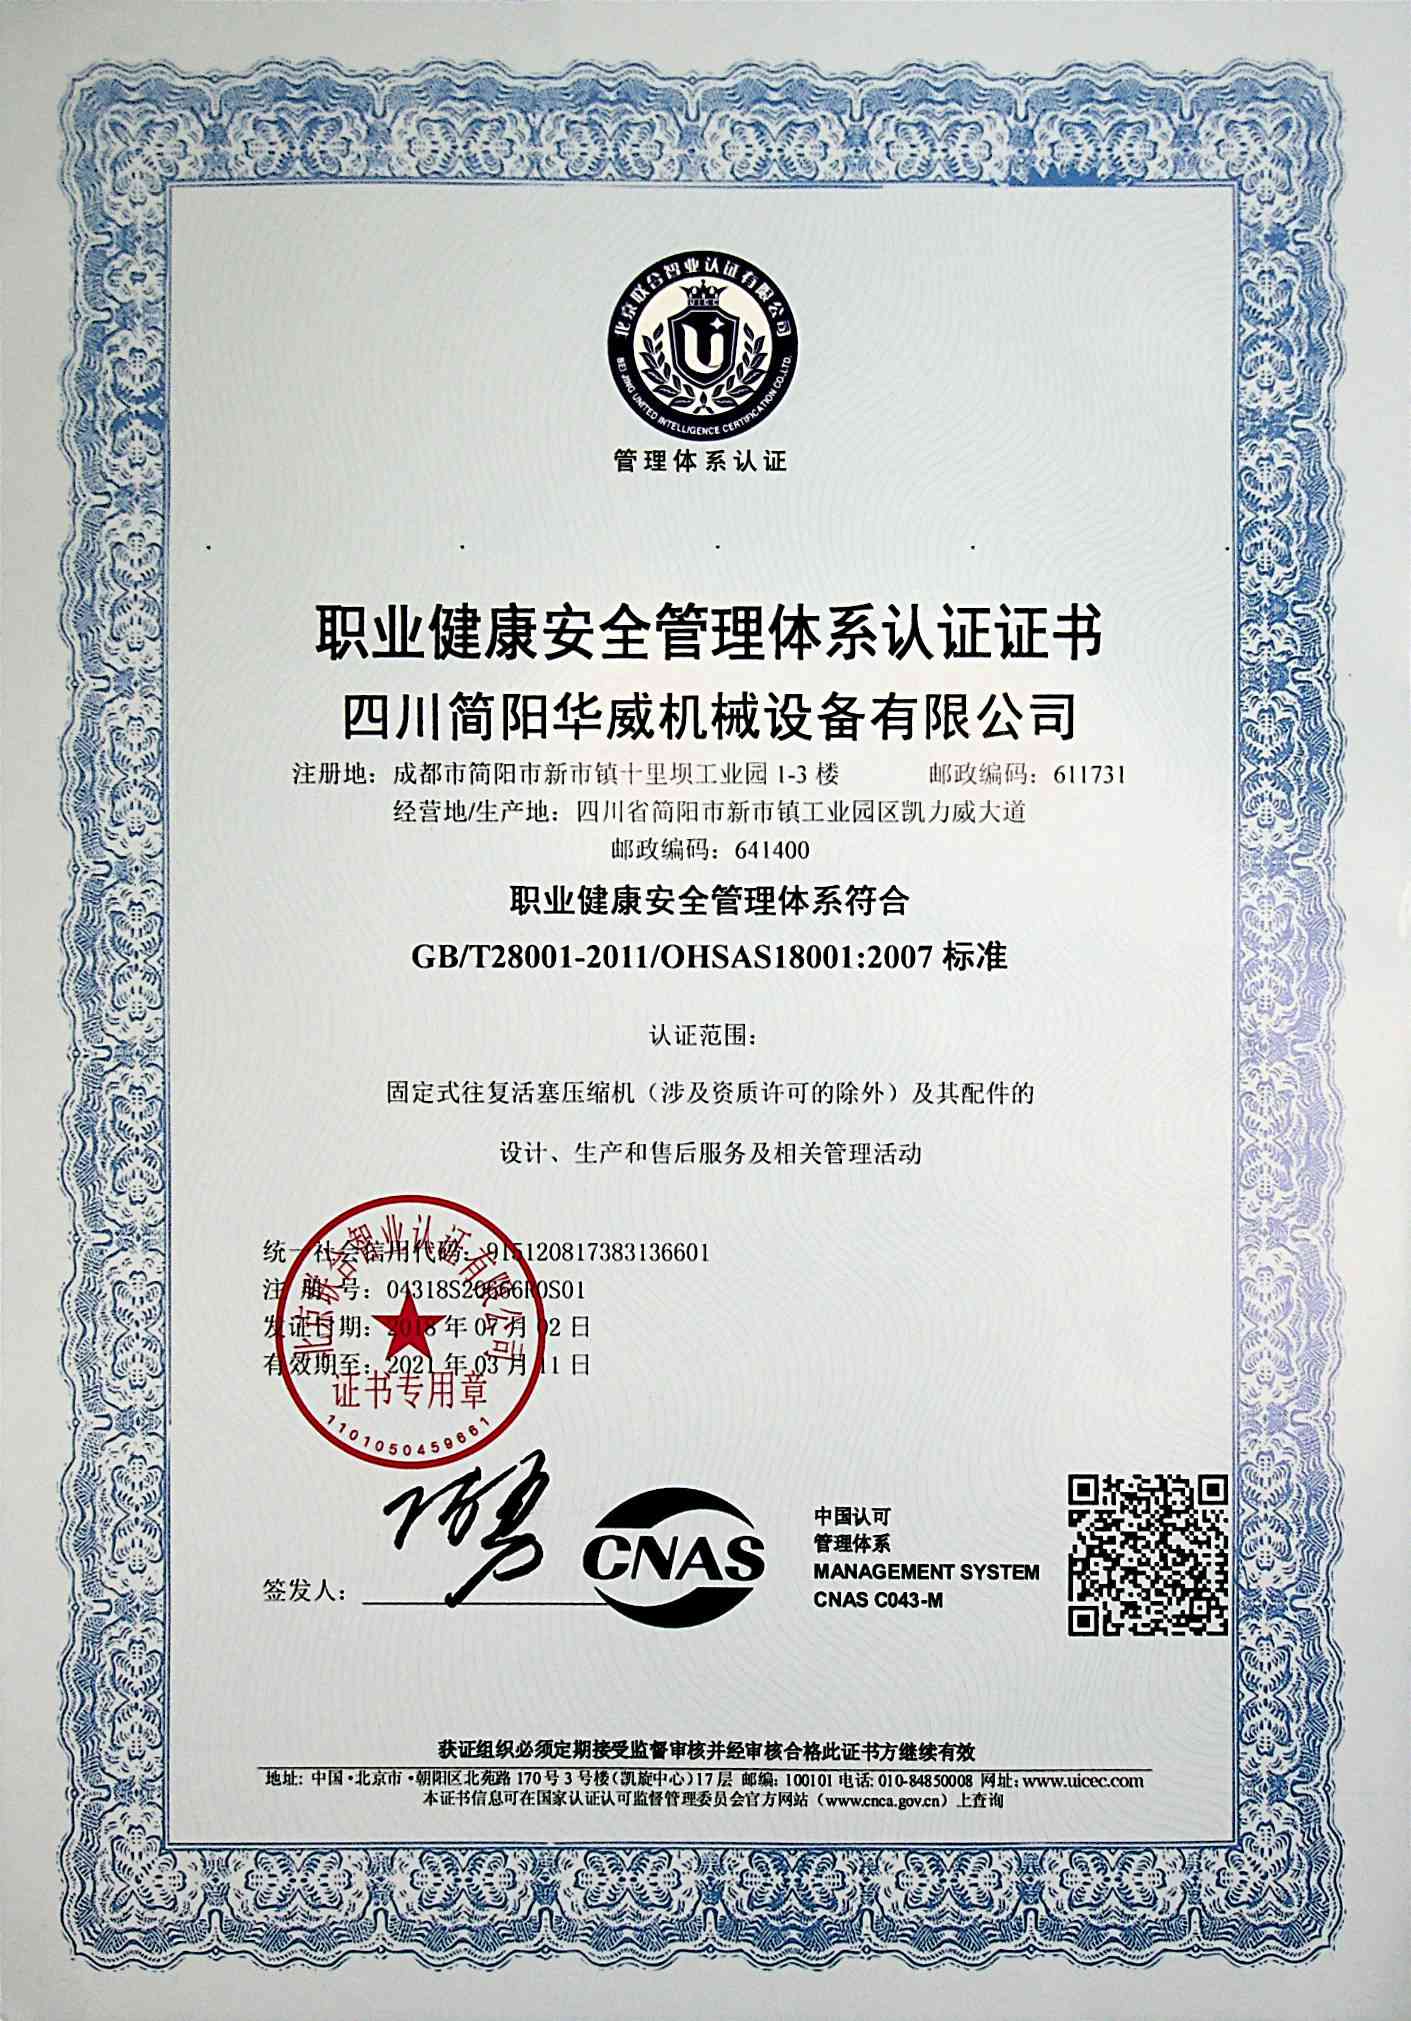 Occupation Health Safety Management System Authentication-Chinese edition